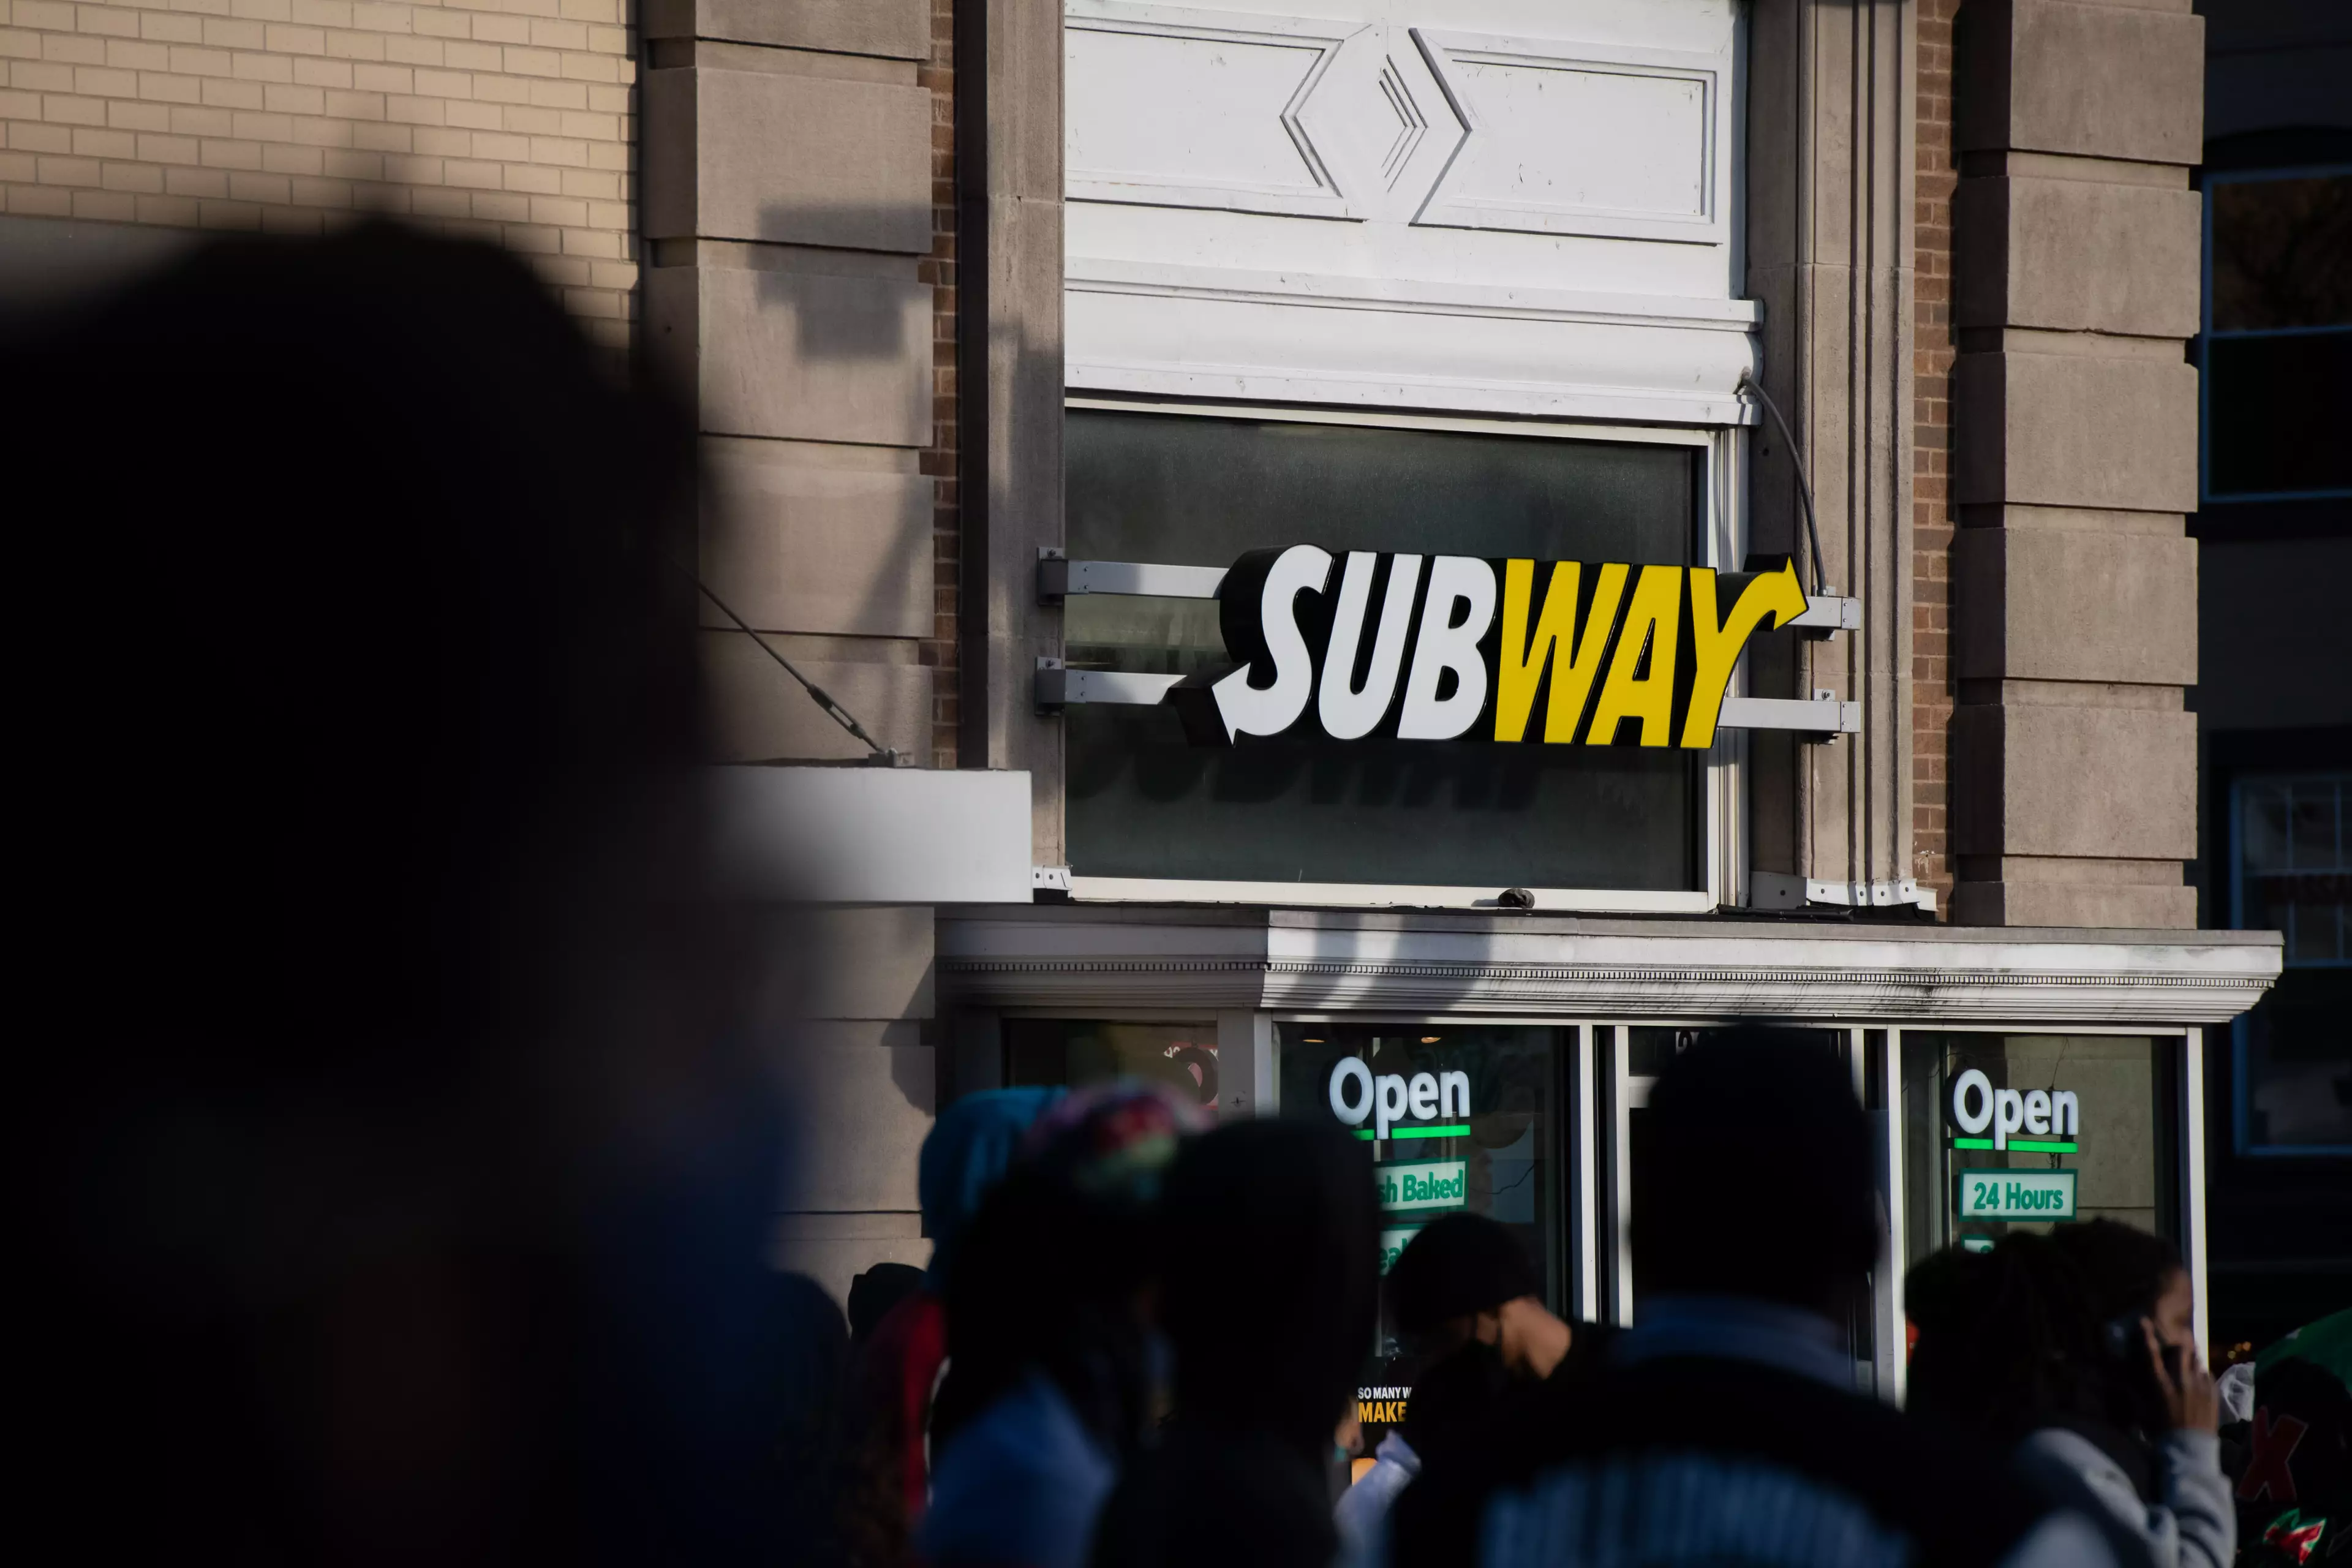 The sandwiches are one of Subway's most popular products.